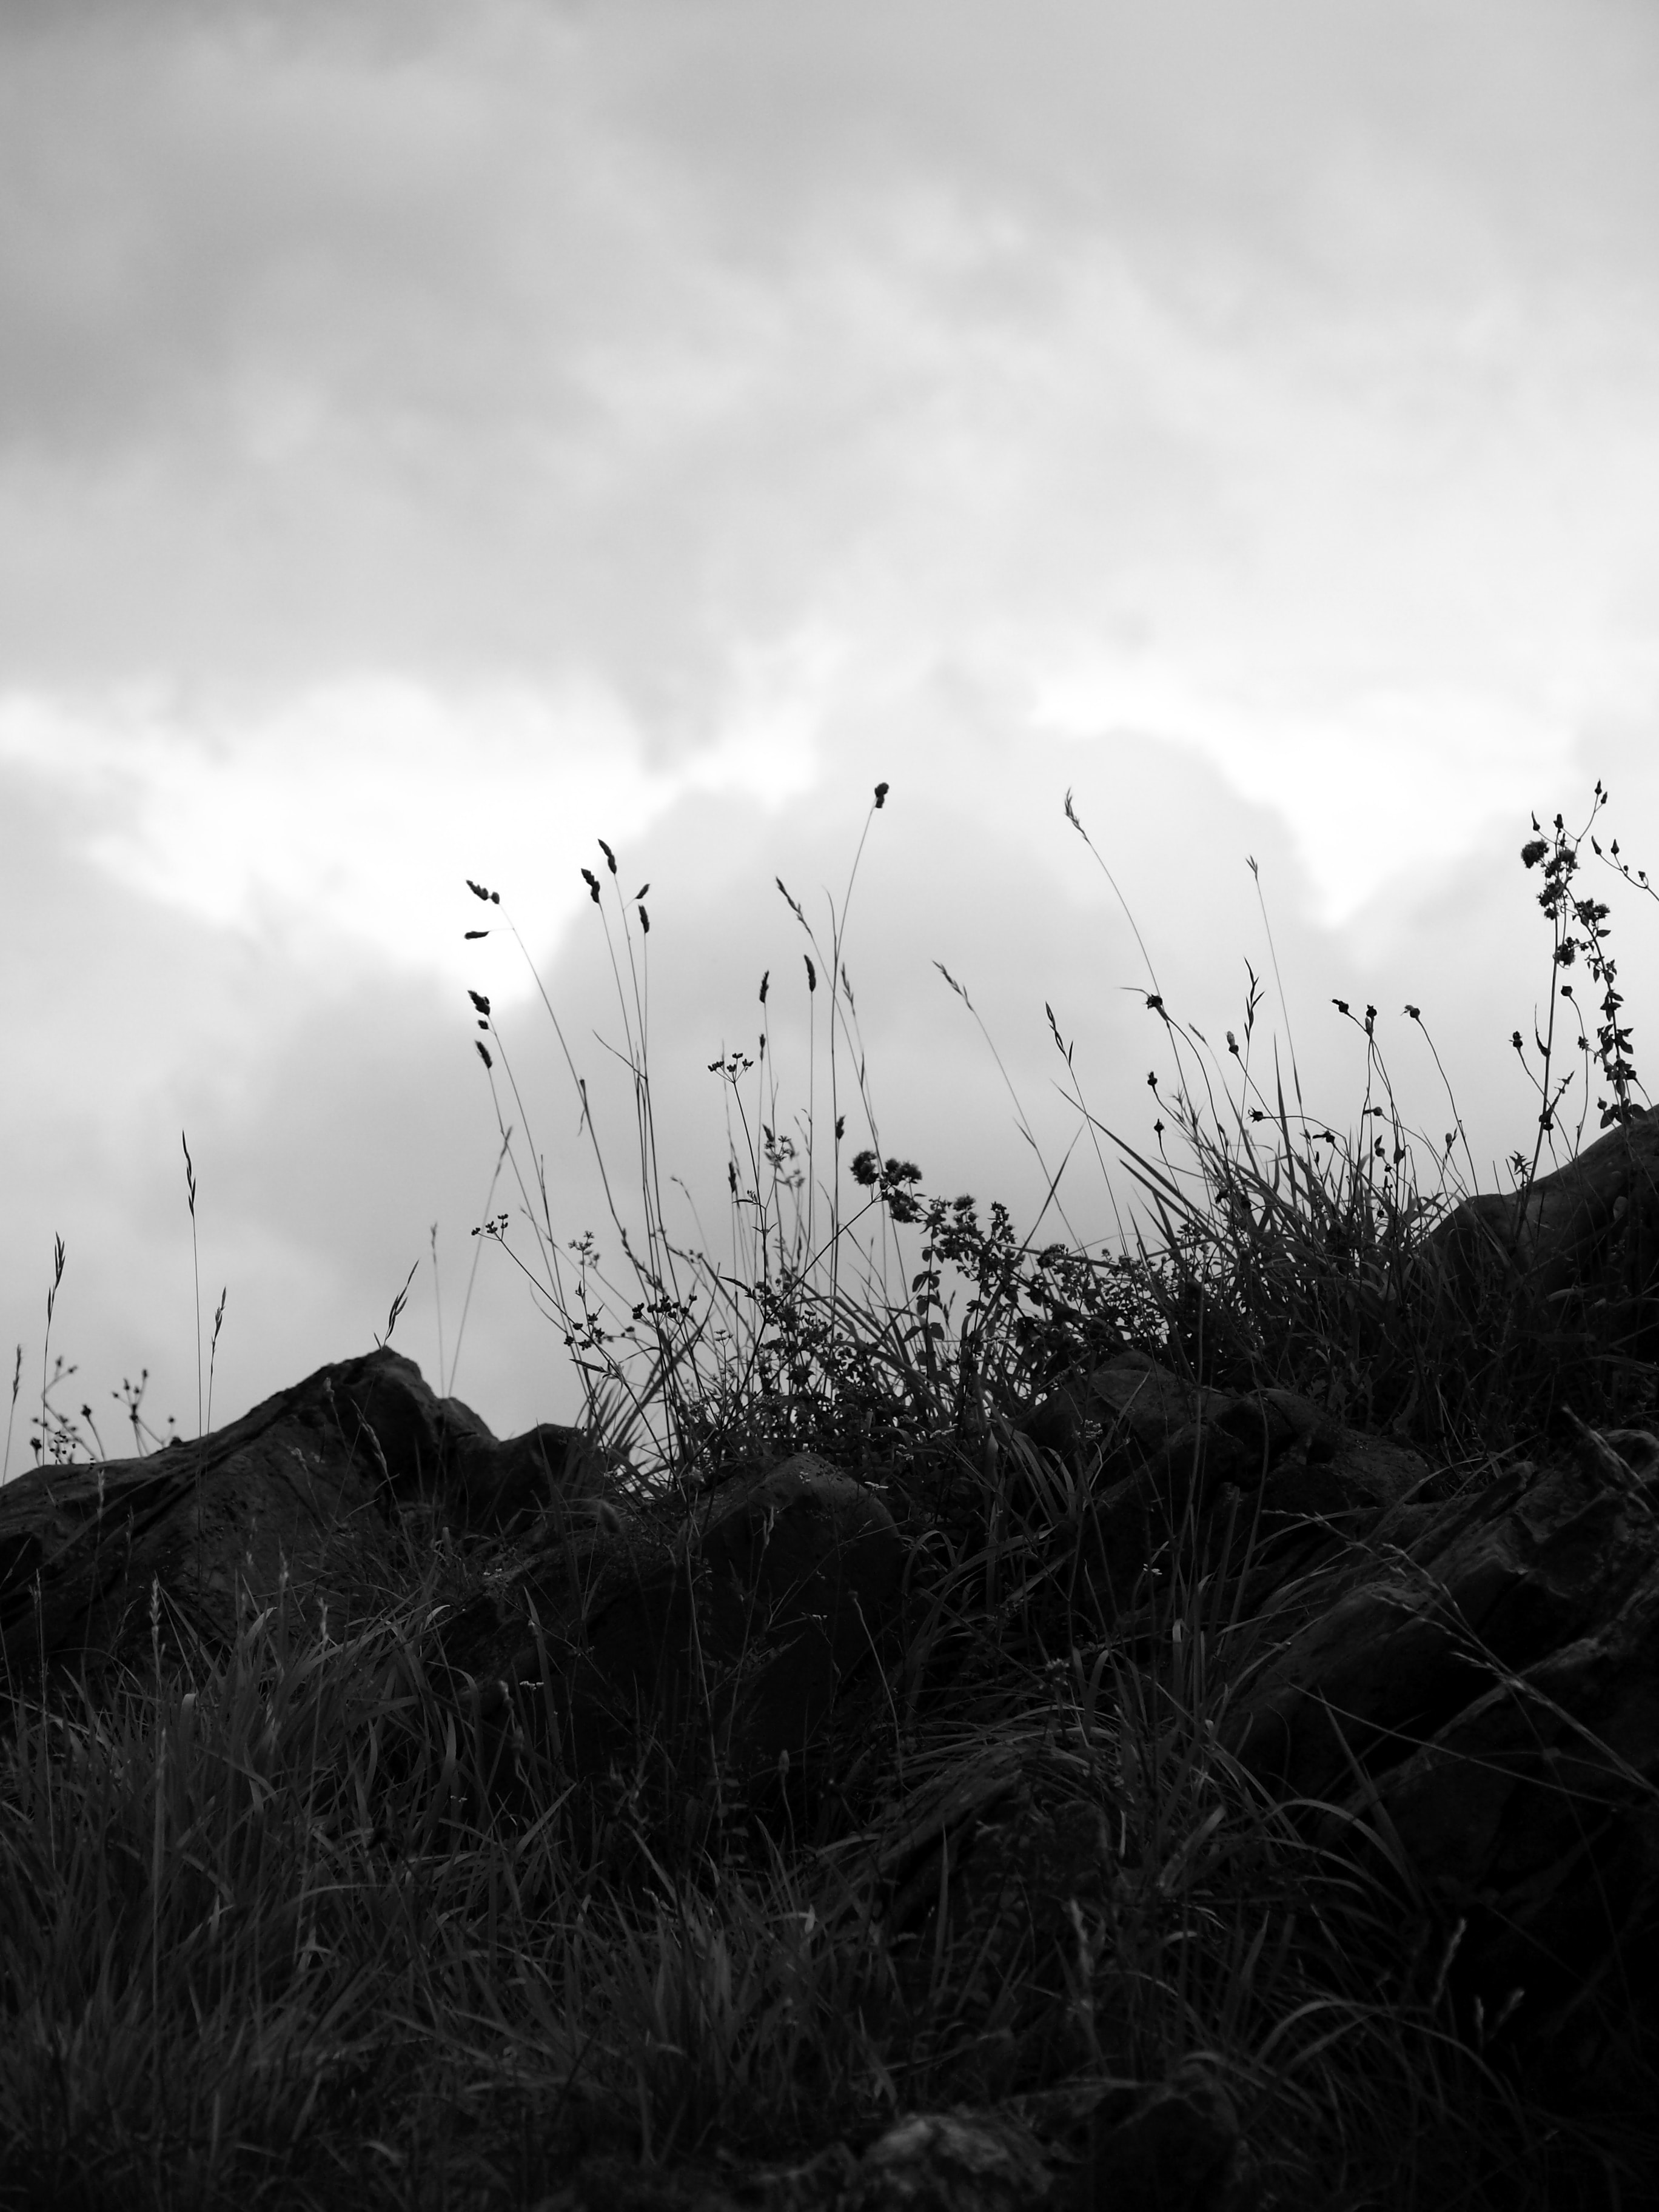 clouds, nature, grass, stones, sky, bw, chb, hill